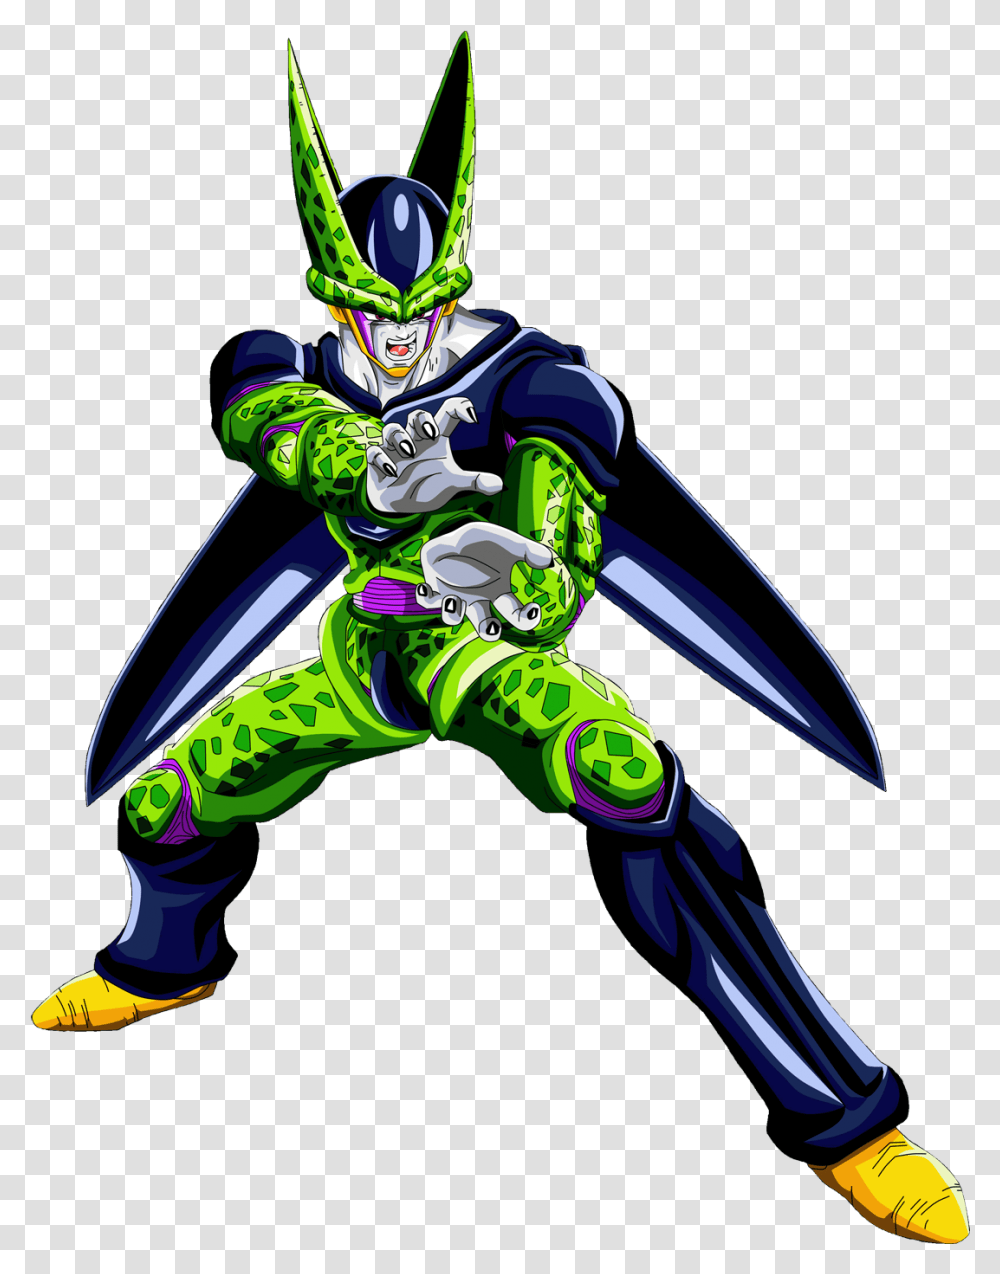 Cell Screenshots Images And Pictures Cell Dragon Ball, Graphics, Art, Person, People Transparent Png